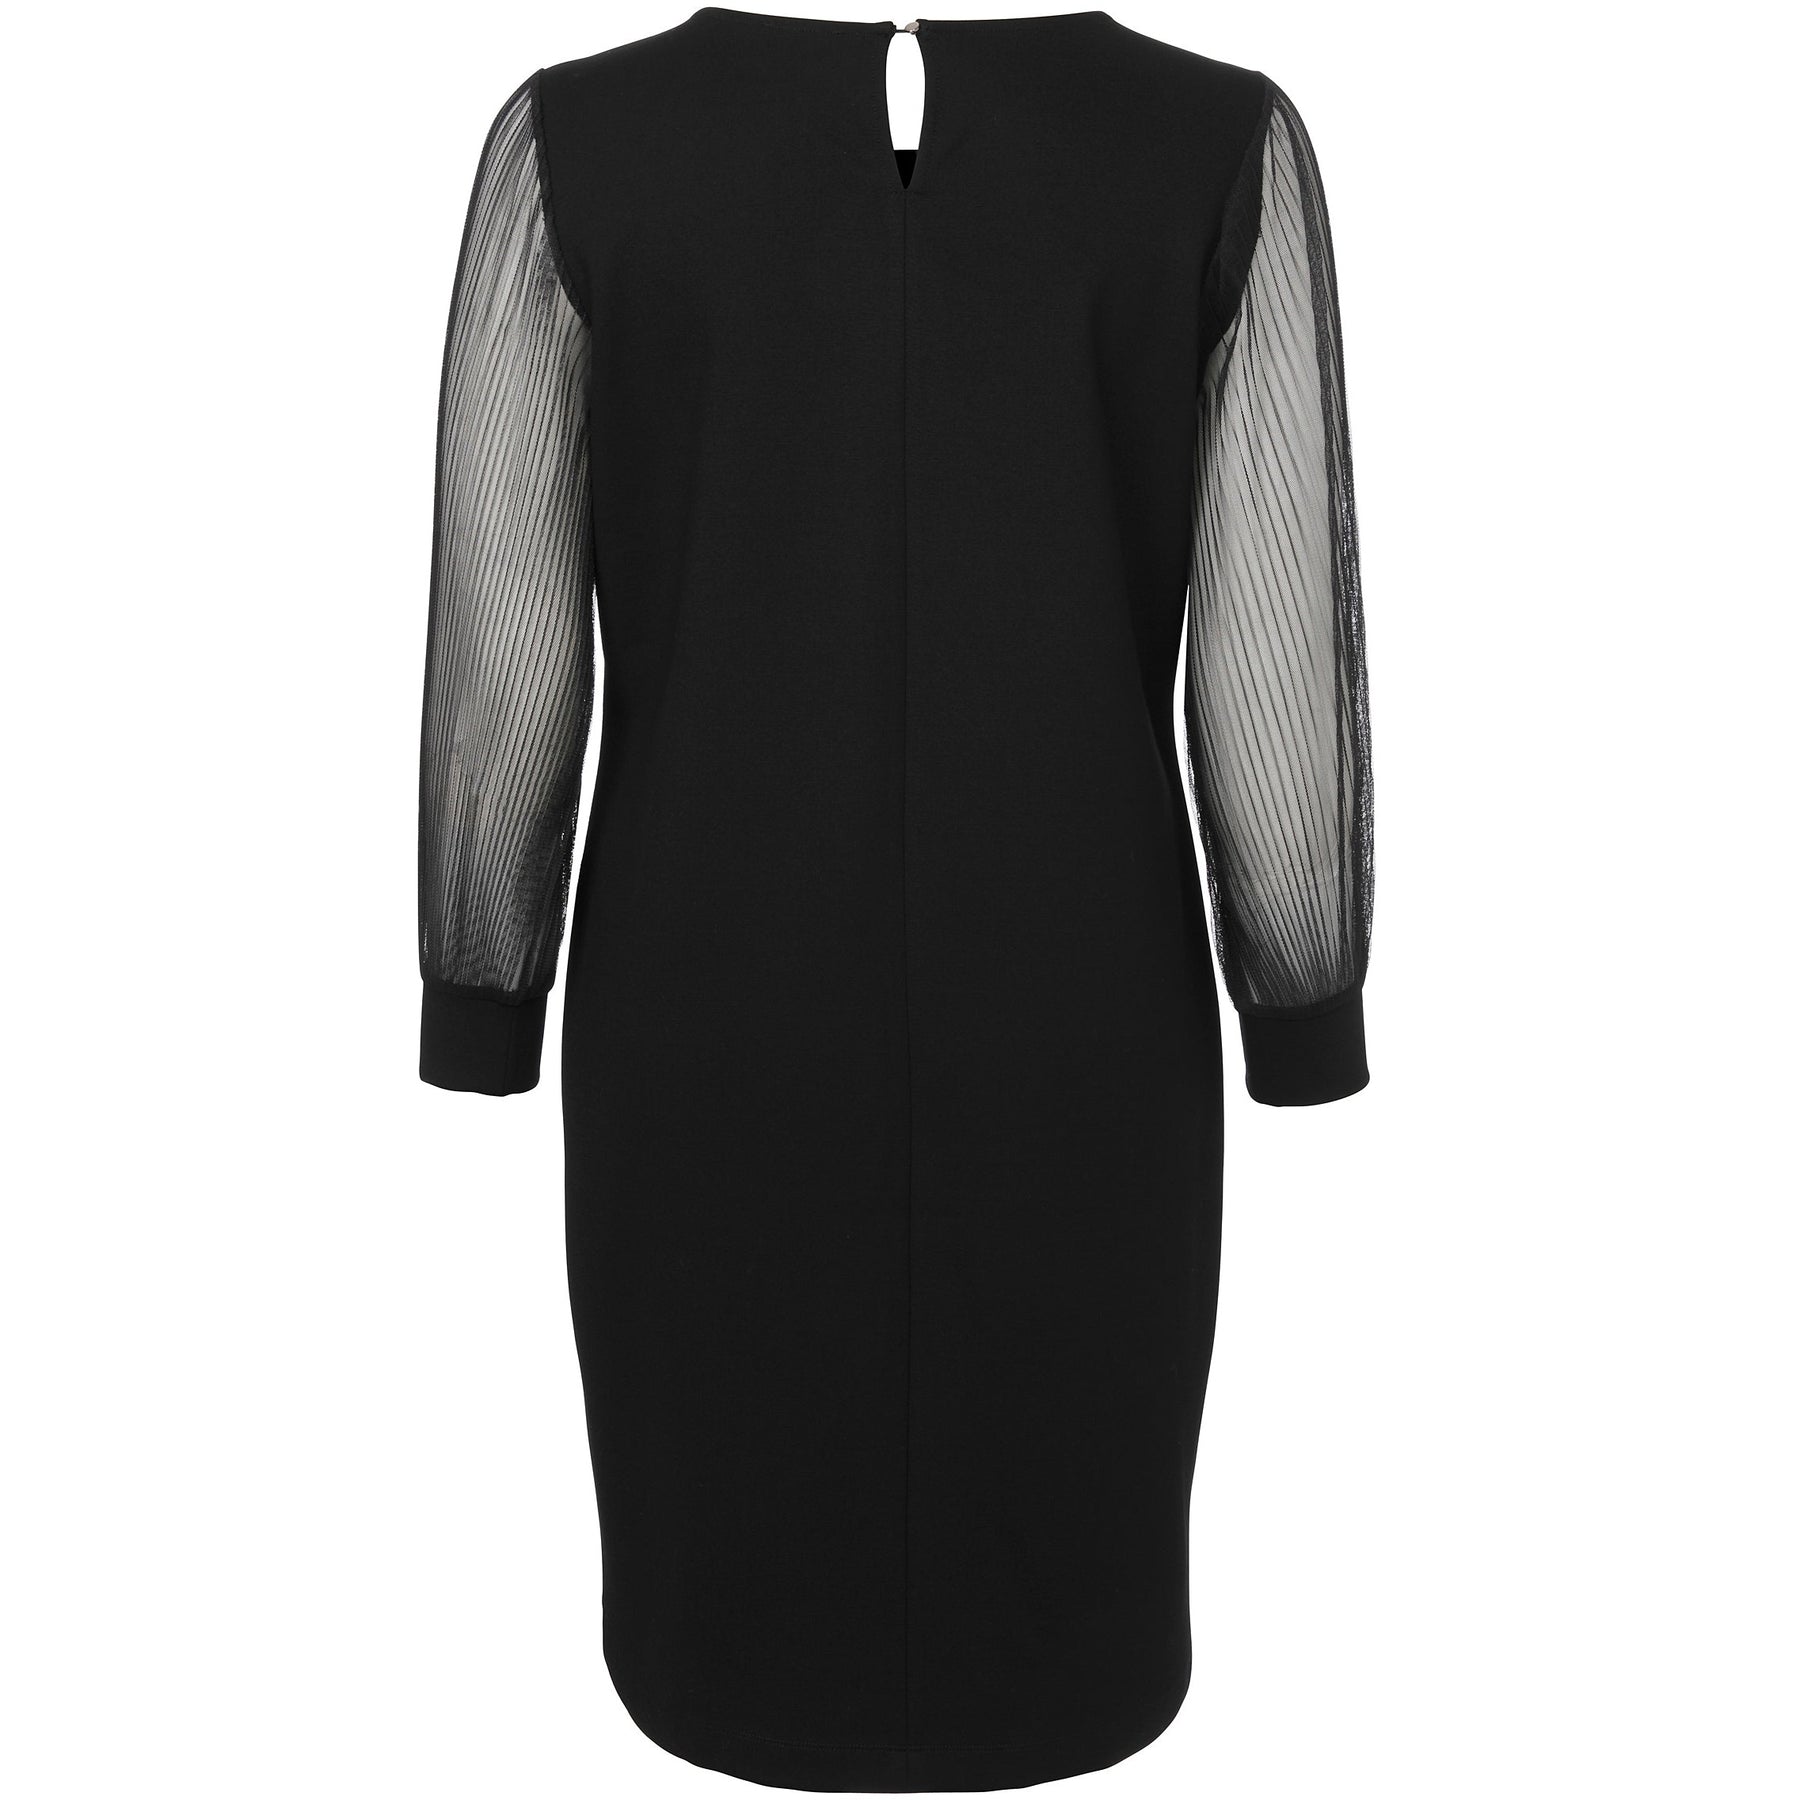 Via Appia Due Black Dress with Sheer Sleeves